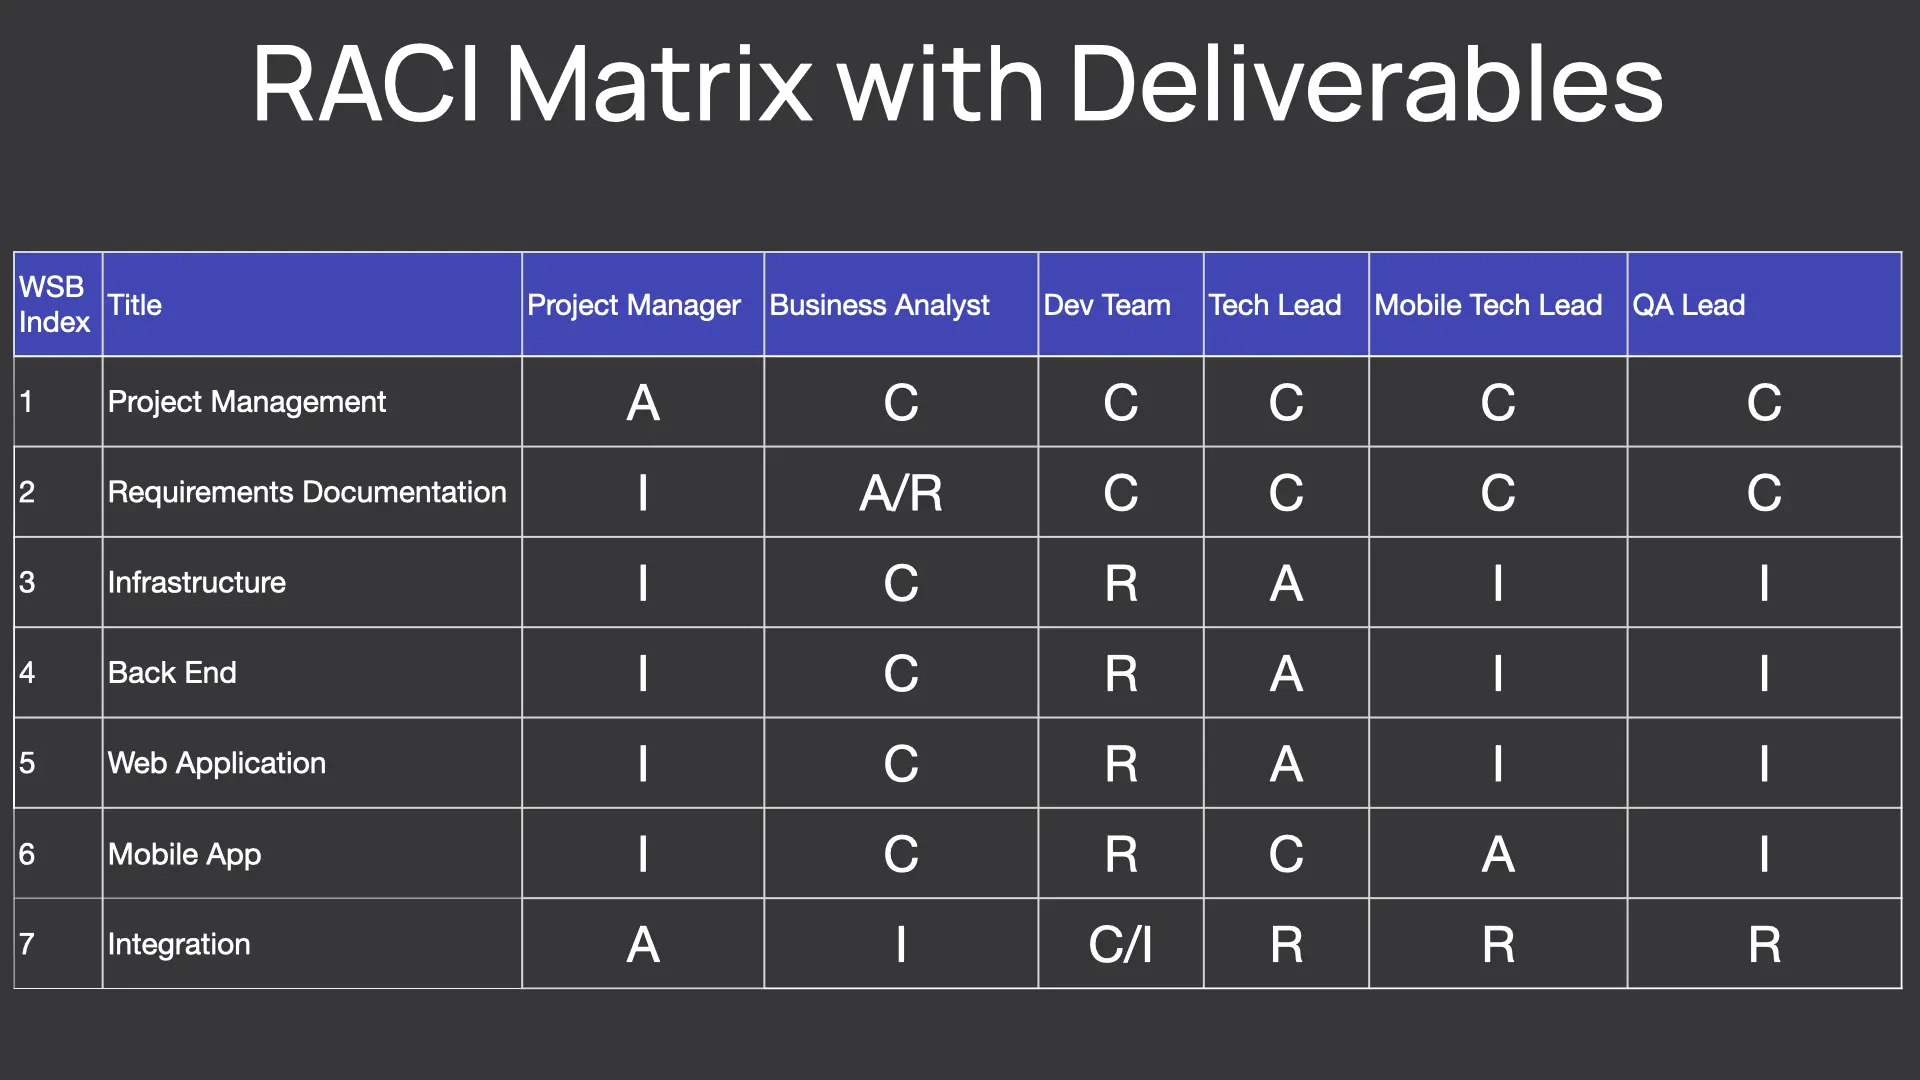 Example of a RACI matrix based on deliverables and roles on a project